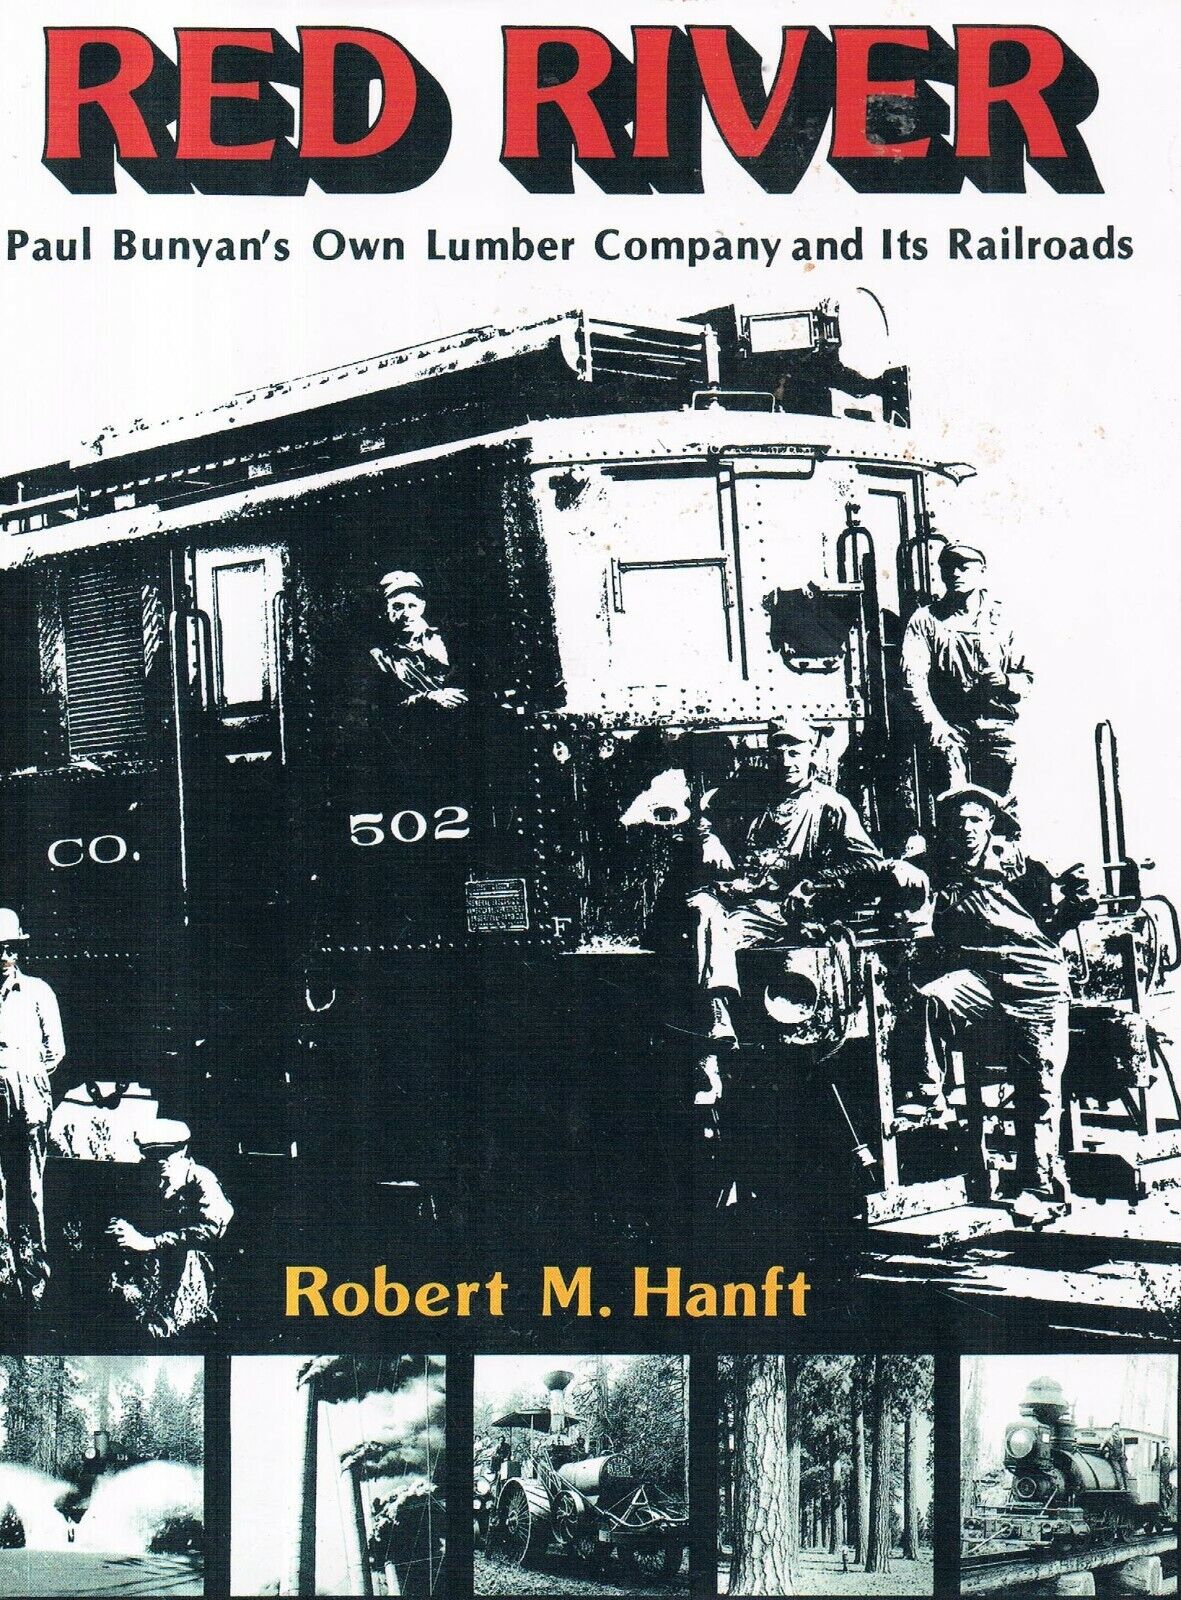 Red River Paul Bunyan\'s Own Lumber Company and its Railroads hardcover, DJ Hanft